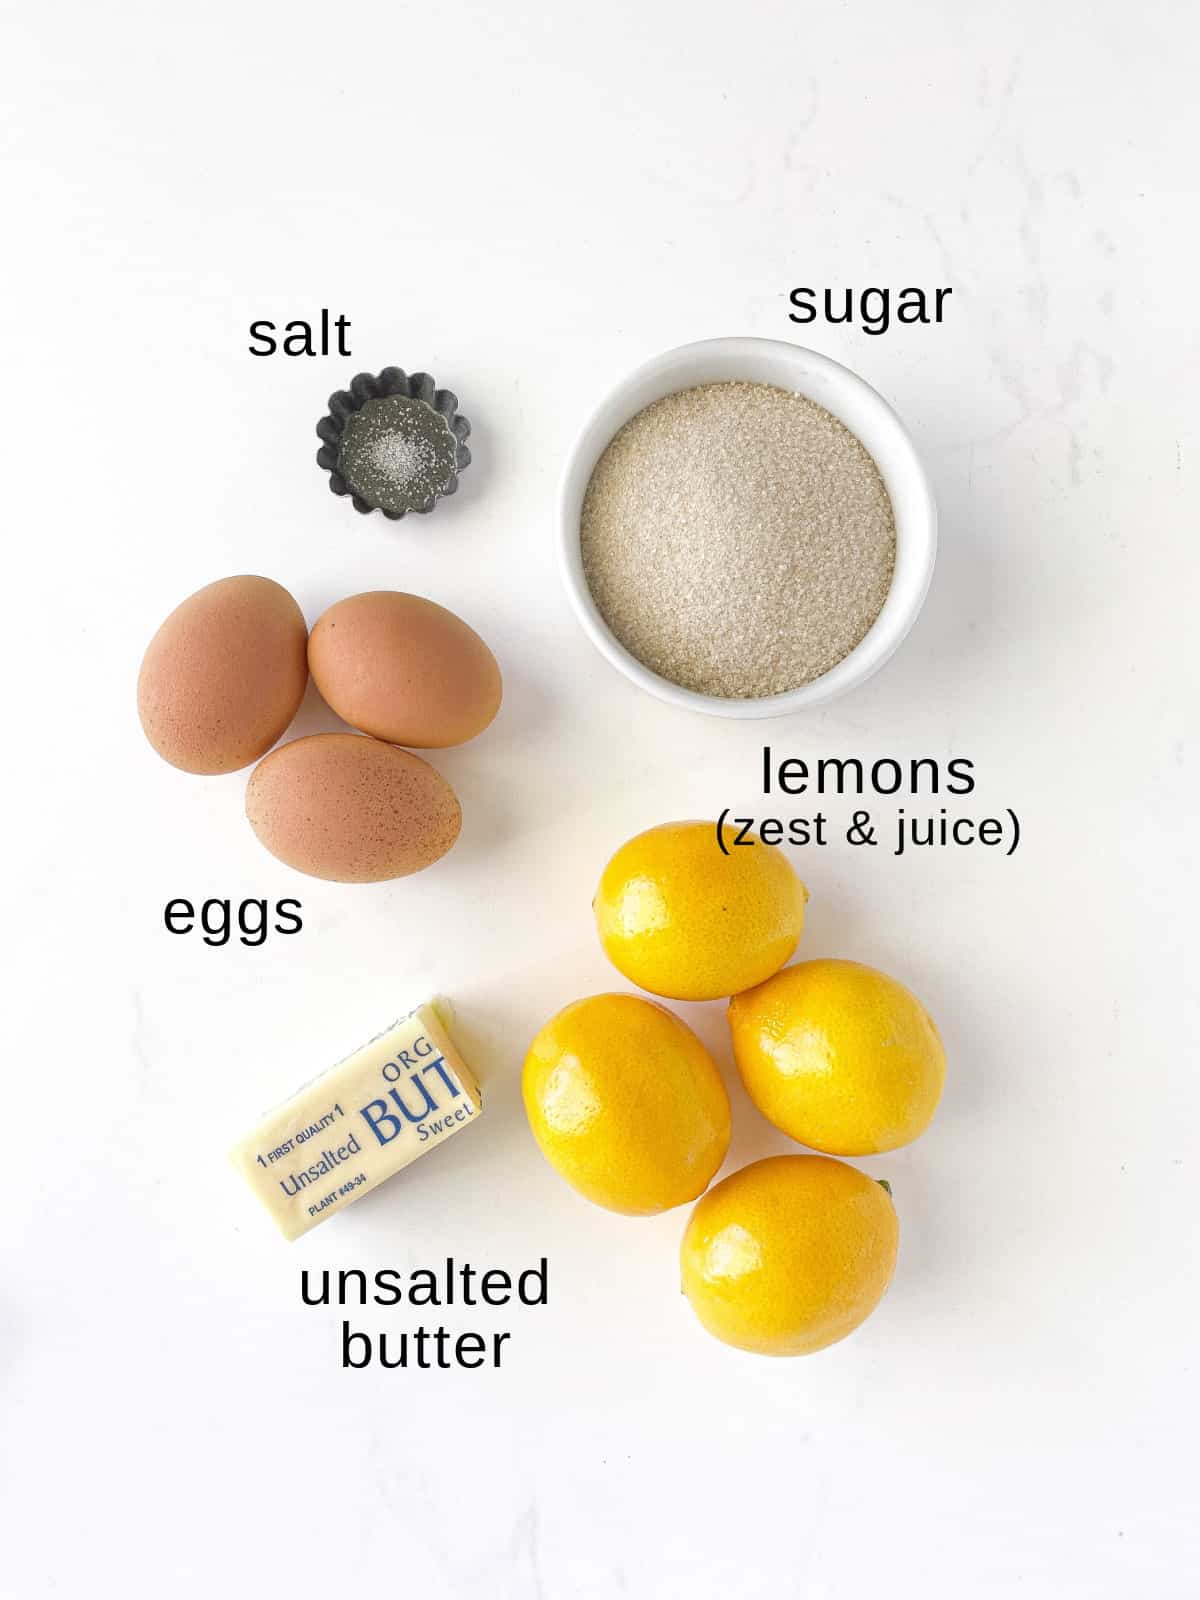 Lemon curd ingredients on a white background.